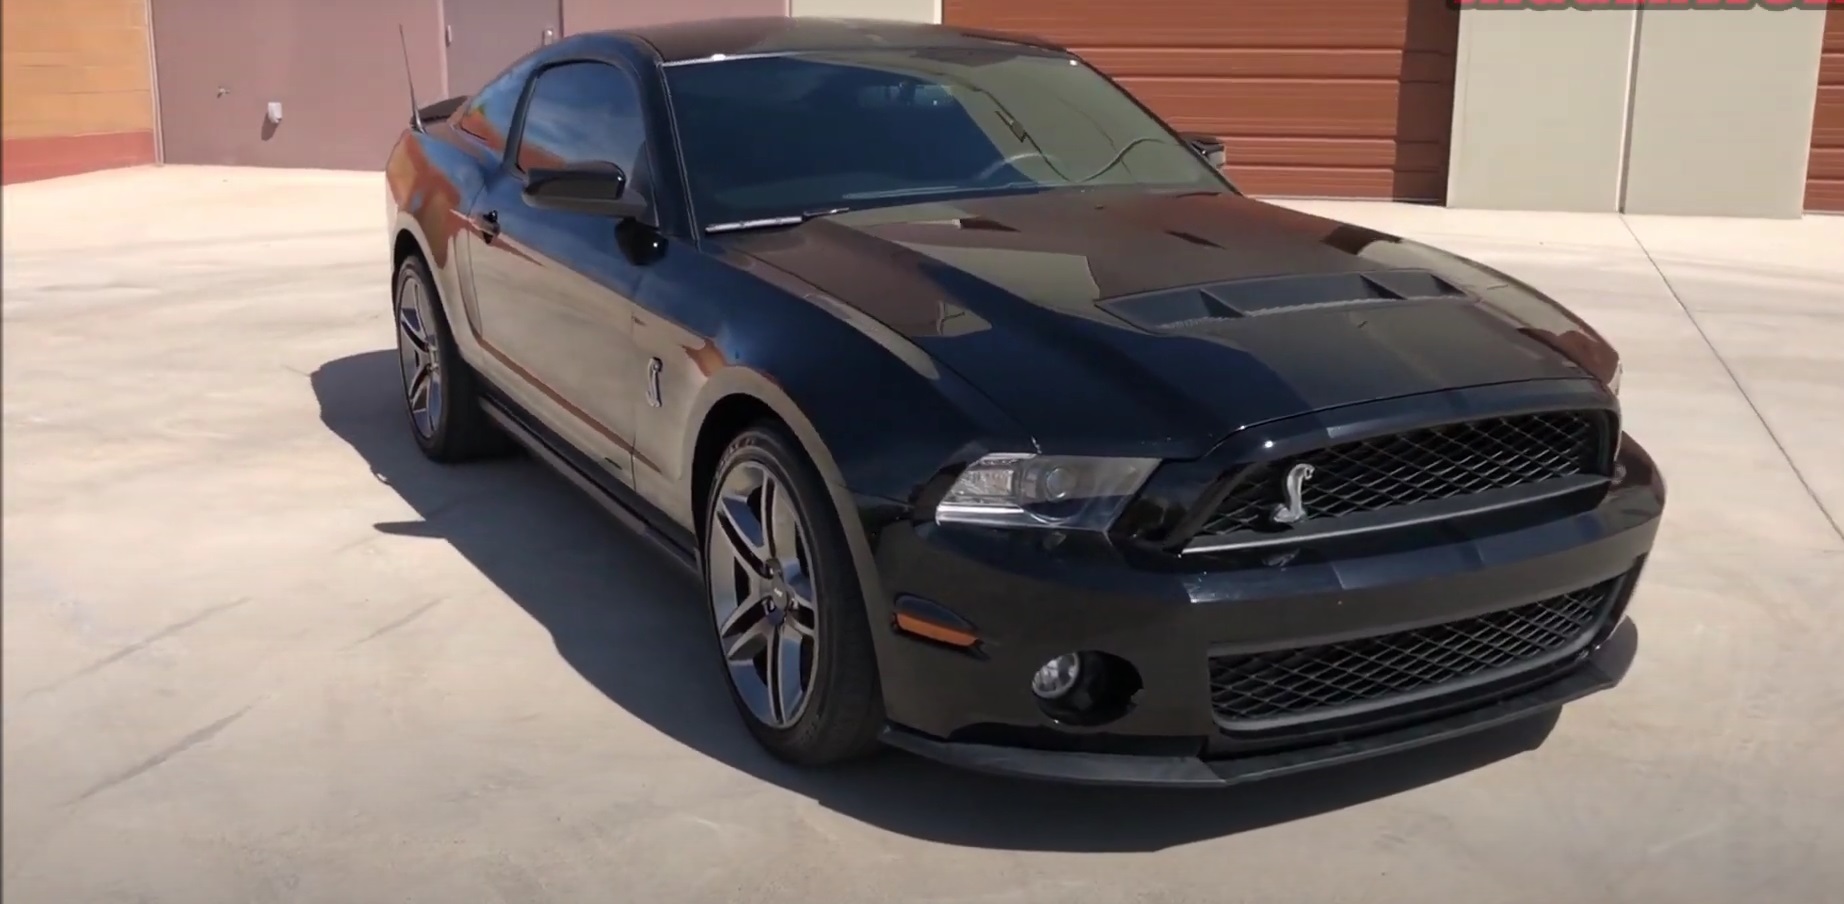 Video: 2010 Ford Mustang Shelby GT500 Overview